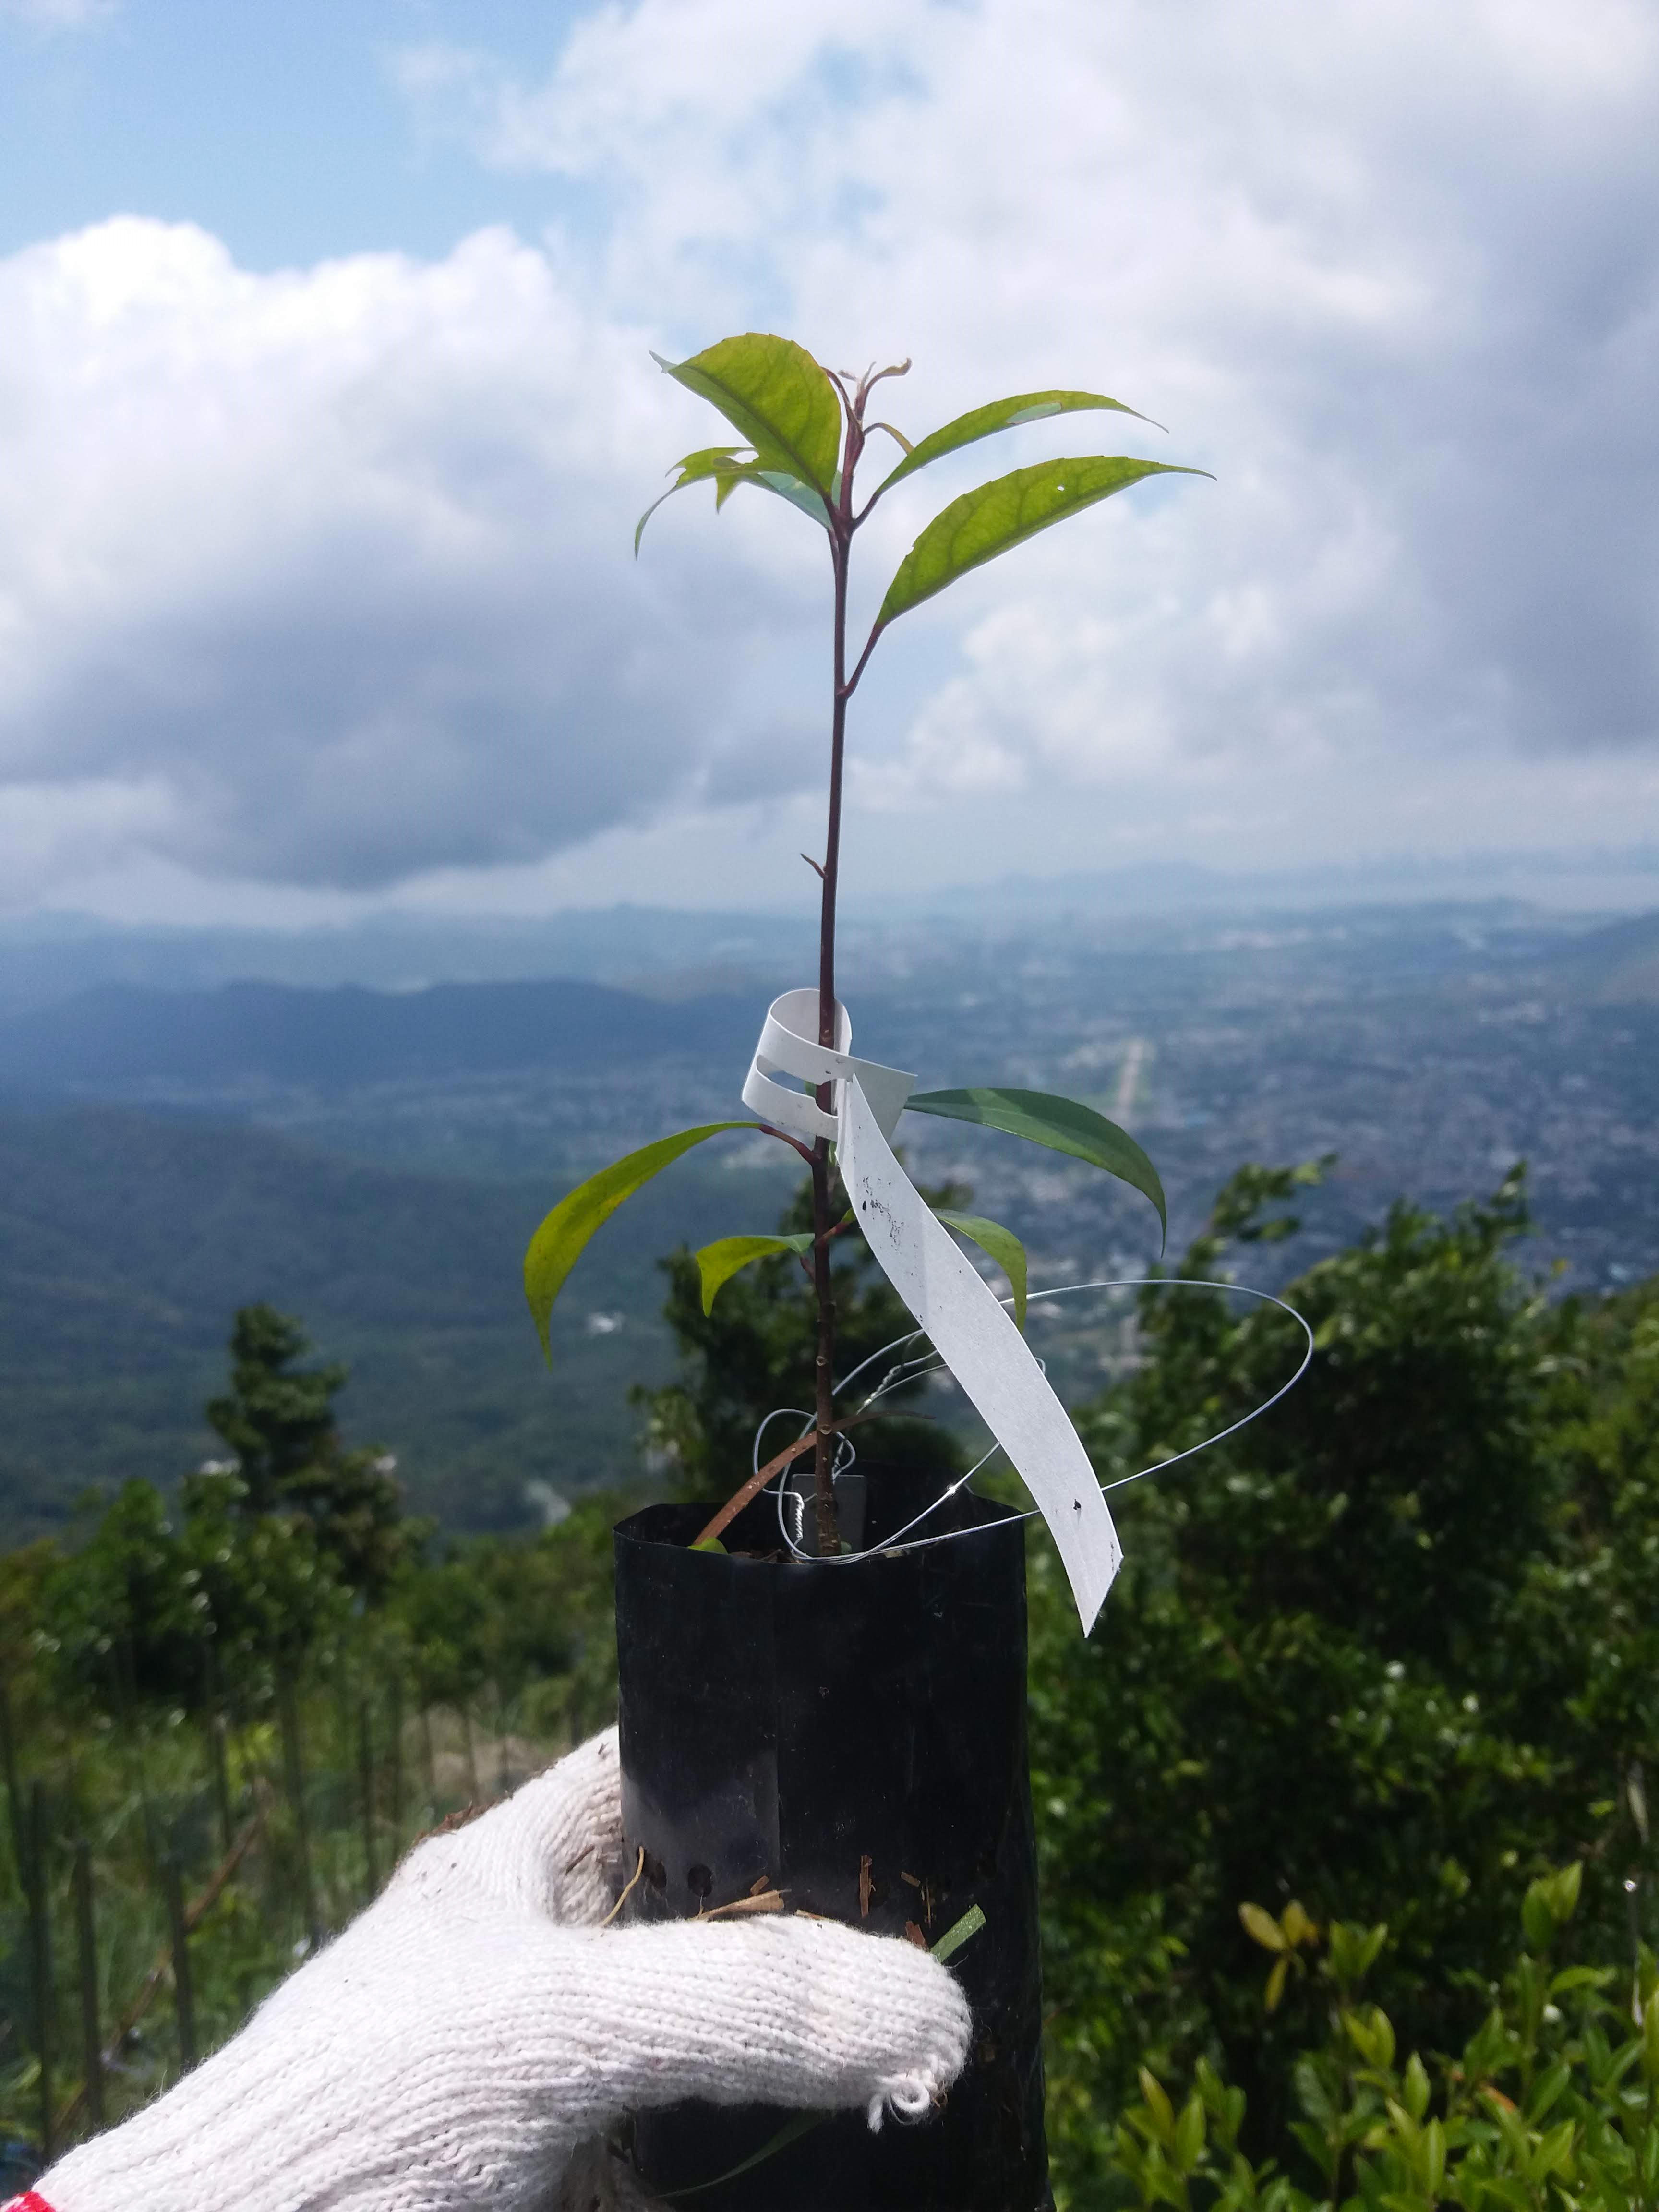 Participate in tree planting events